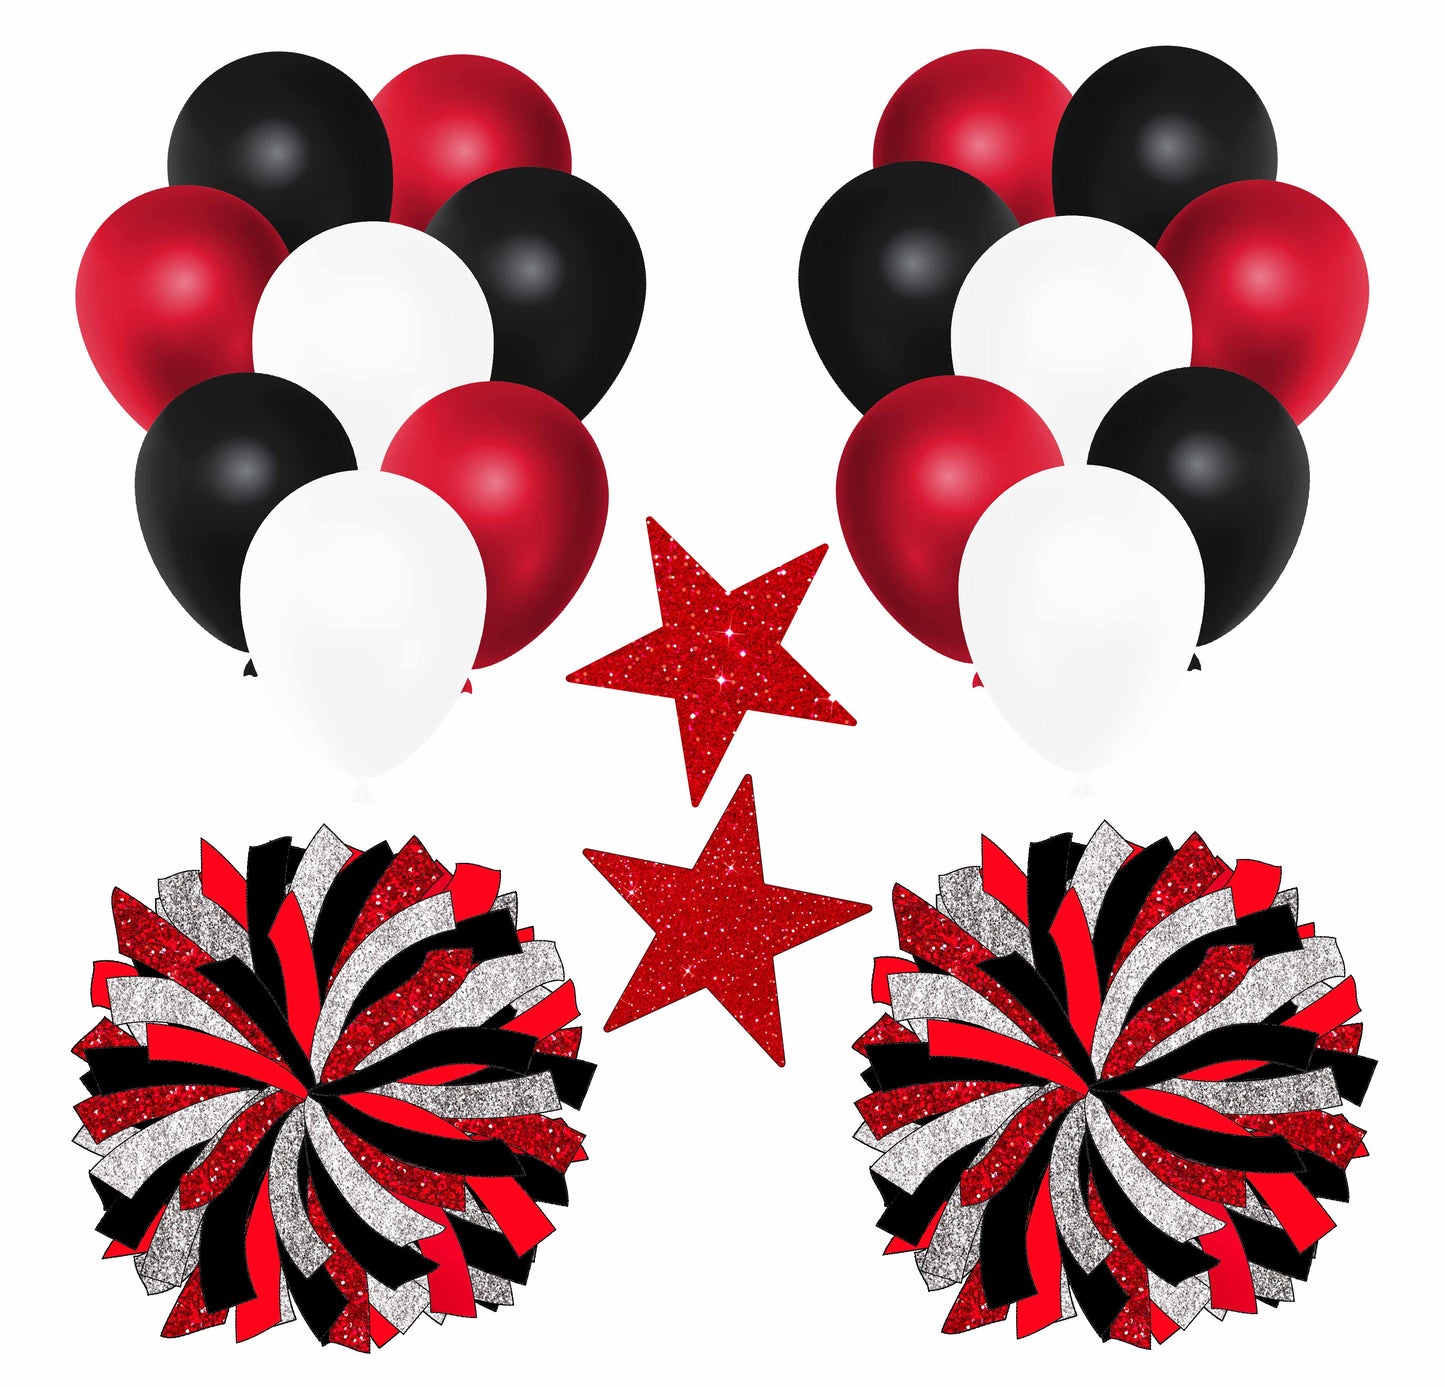 Black White Red Balloons and Pom Poms Half Sheet  (Must Purchase 2 Half sheets - You Can Mix & Match)